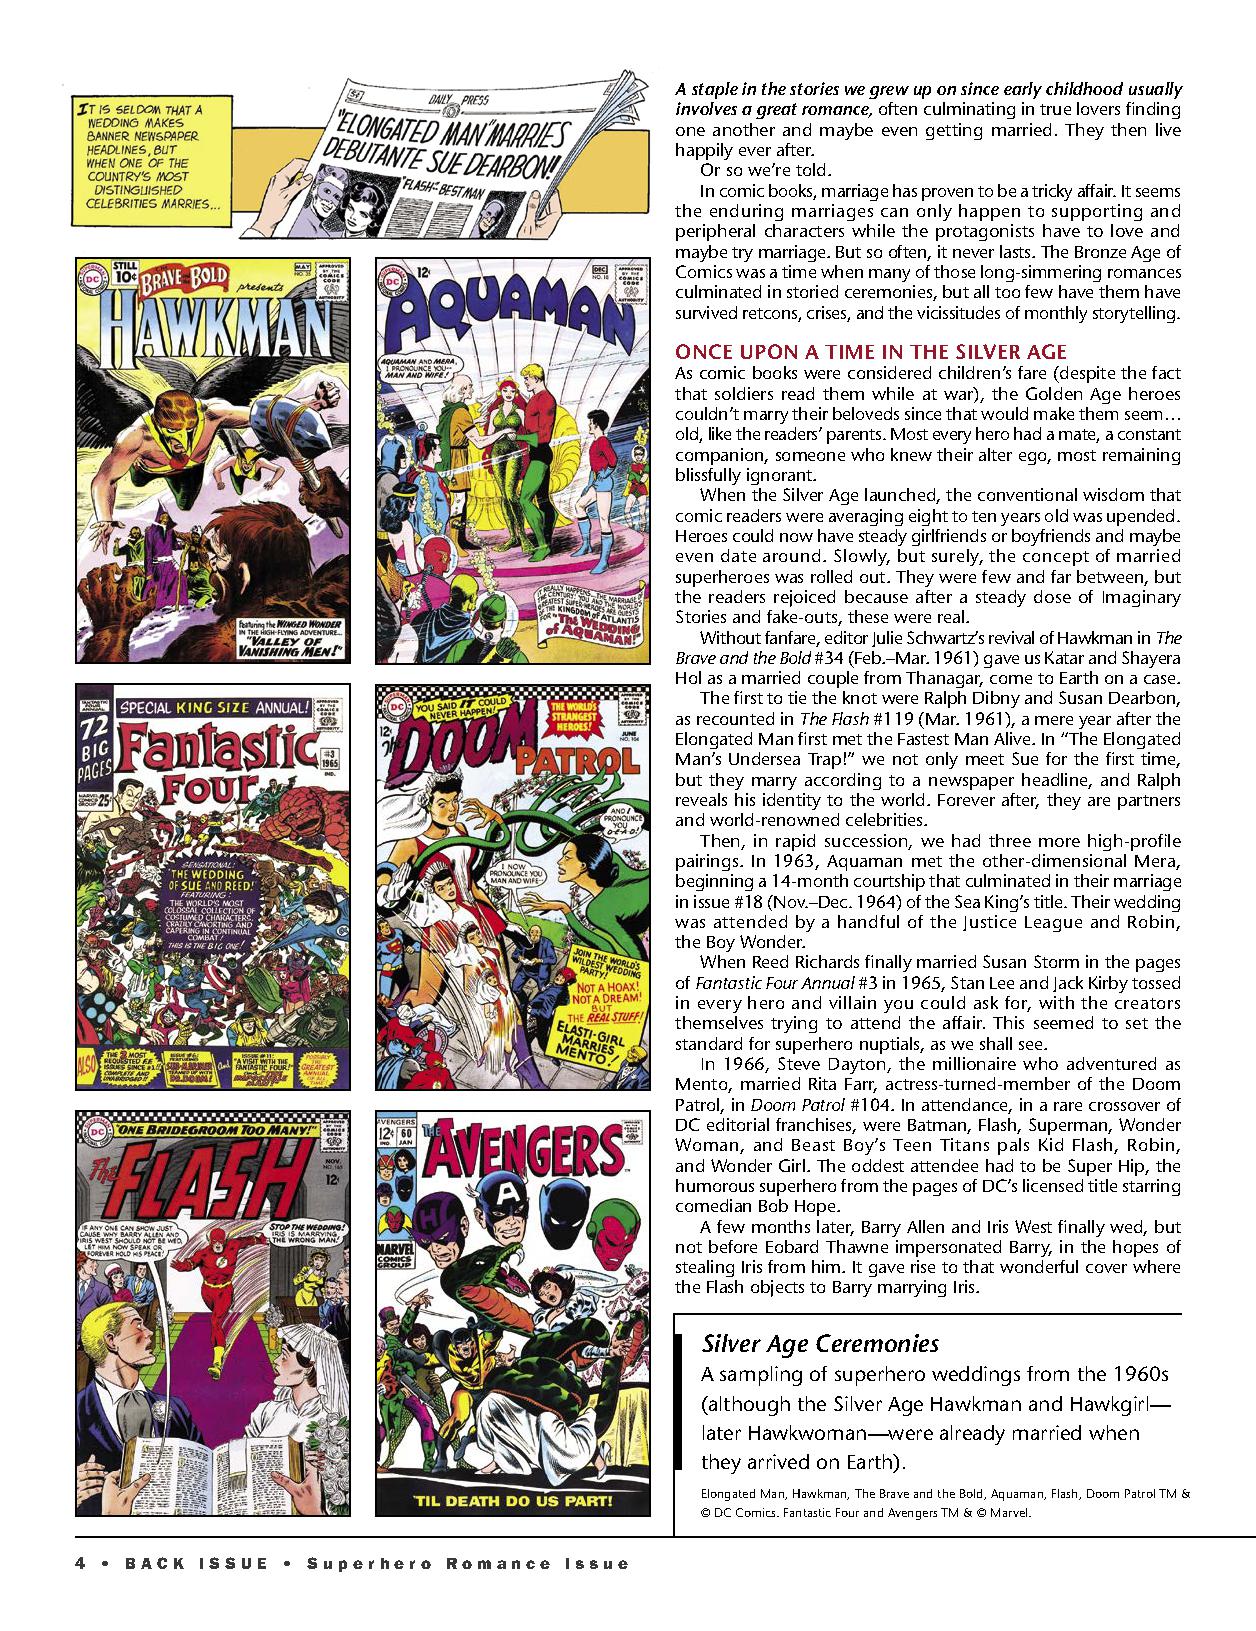 Read online Back Issue comic -  Issue #123 - 6